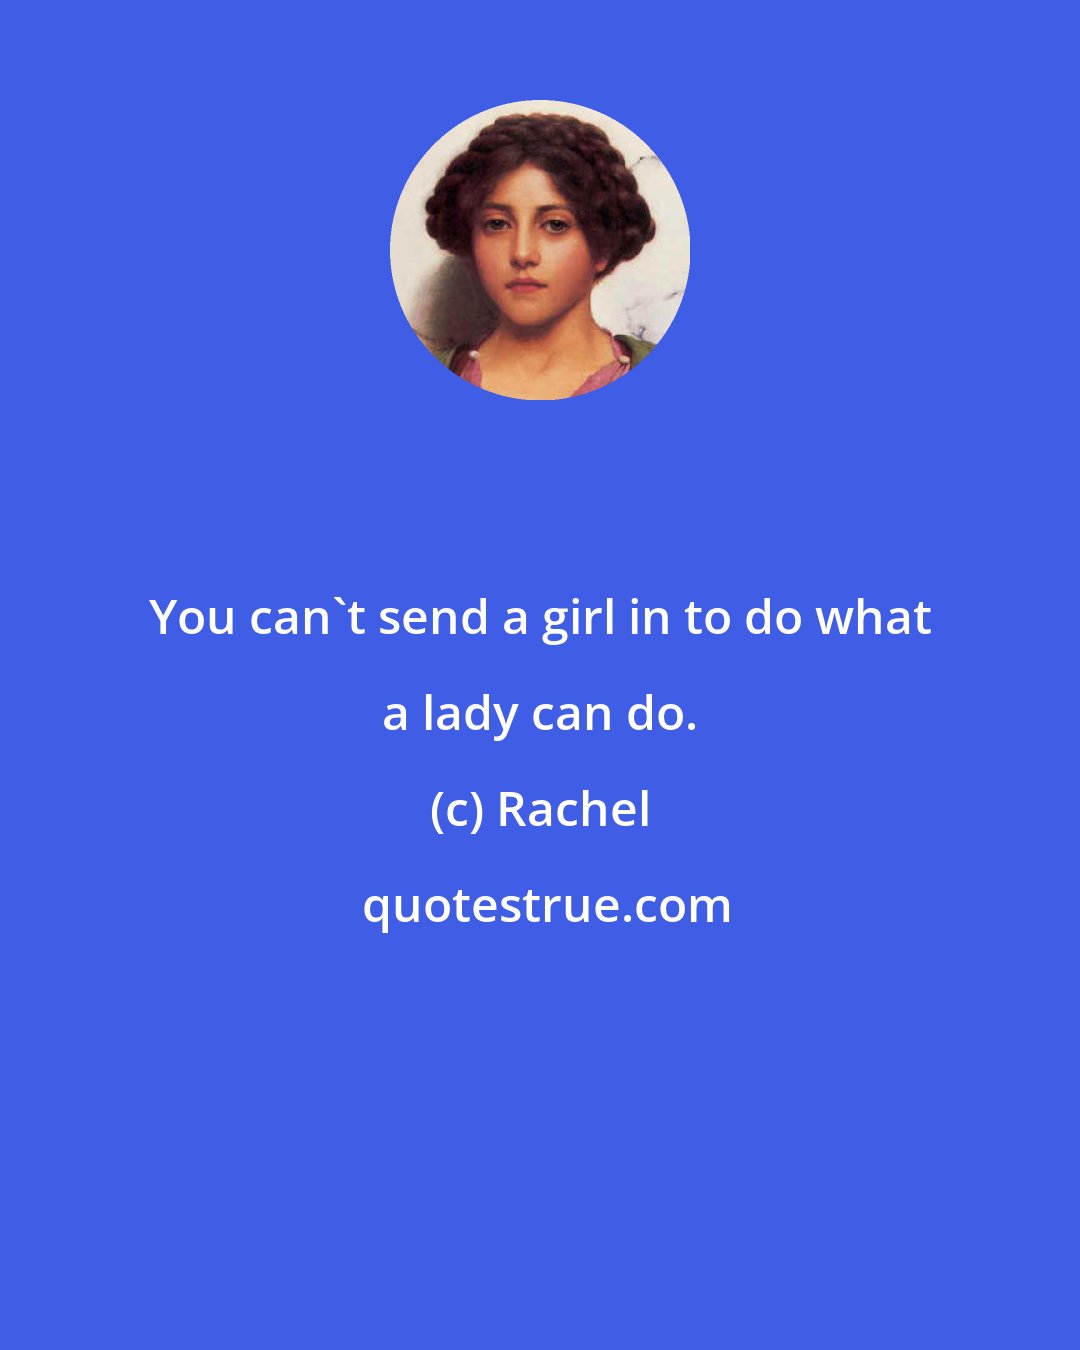 Rachel: You can't send a girl in to do what a lady can do.